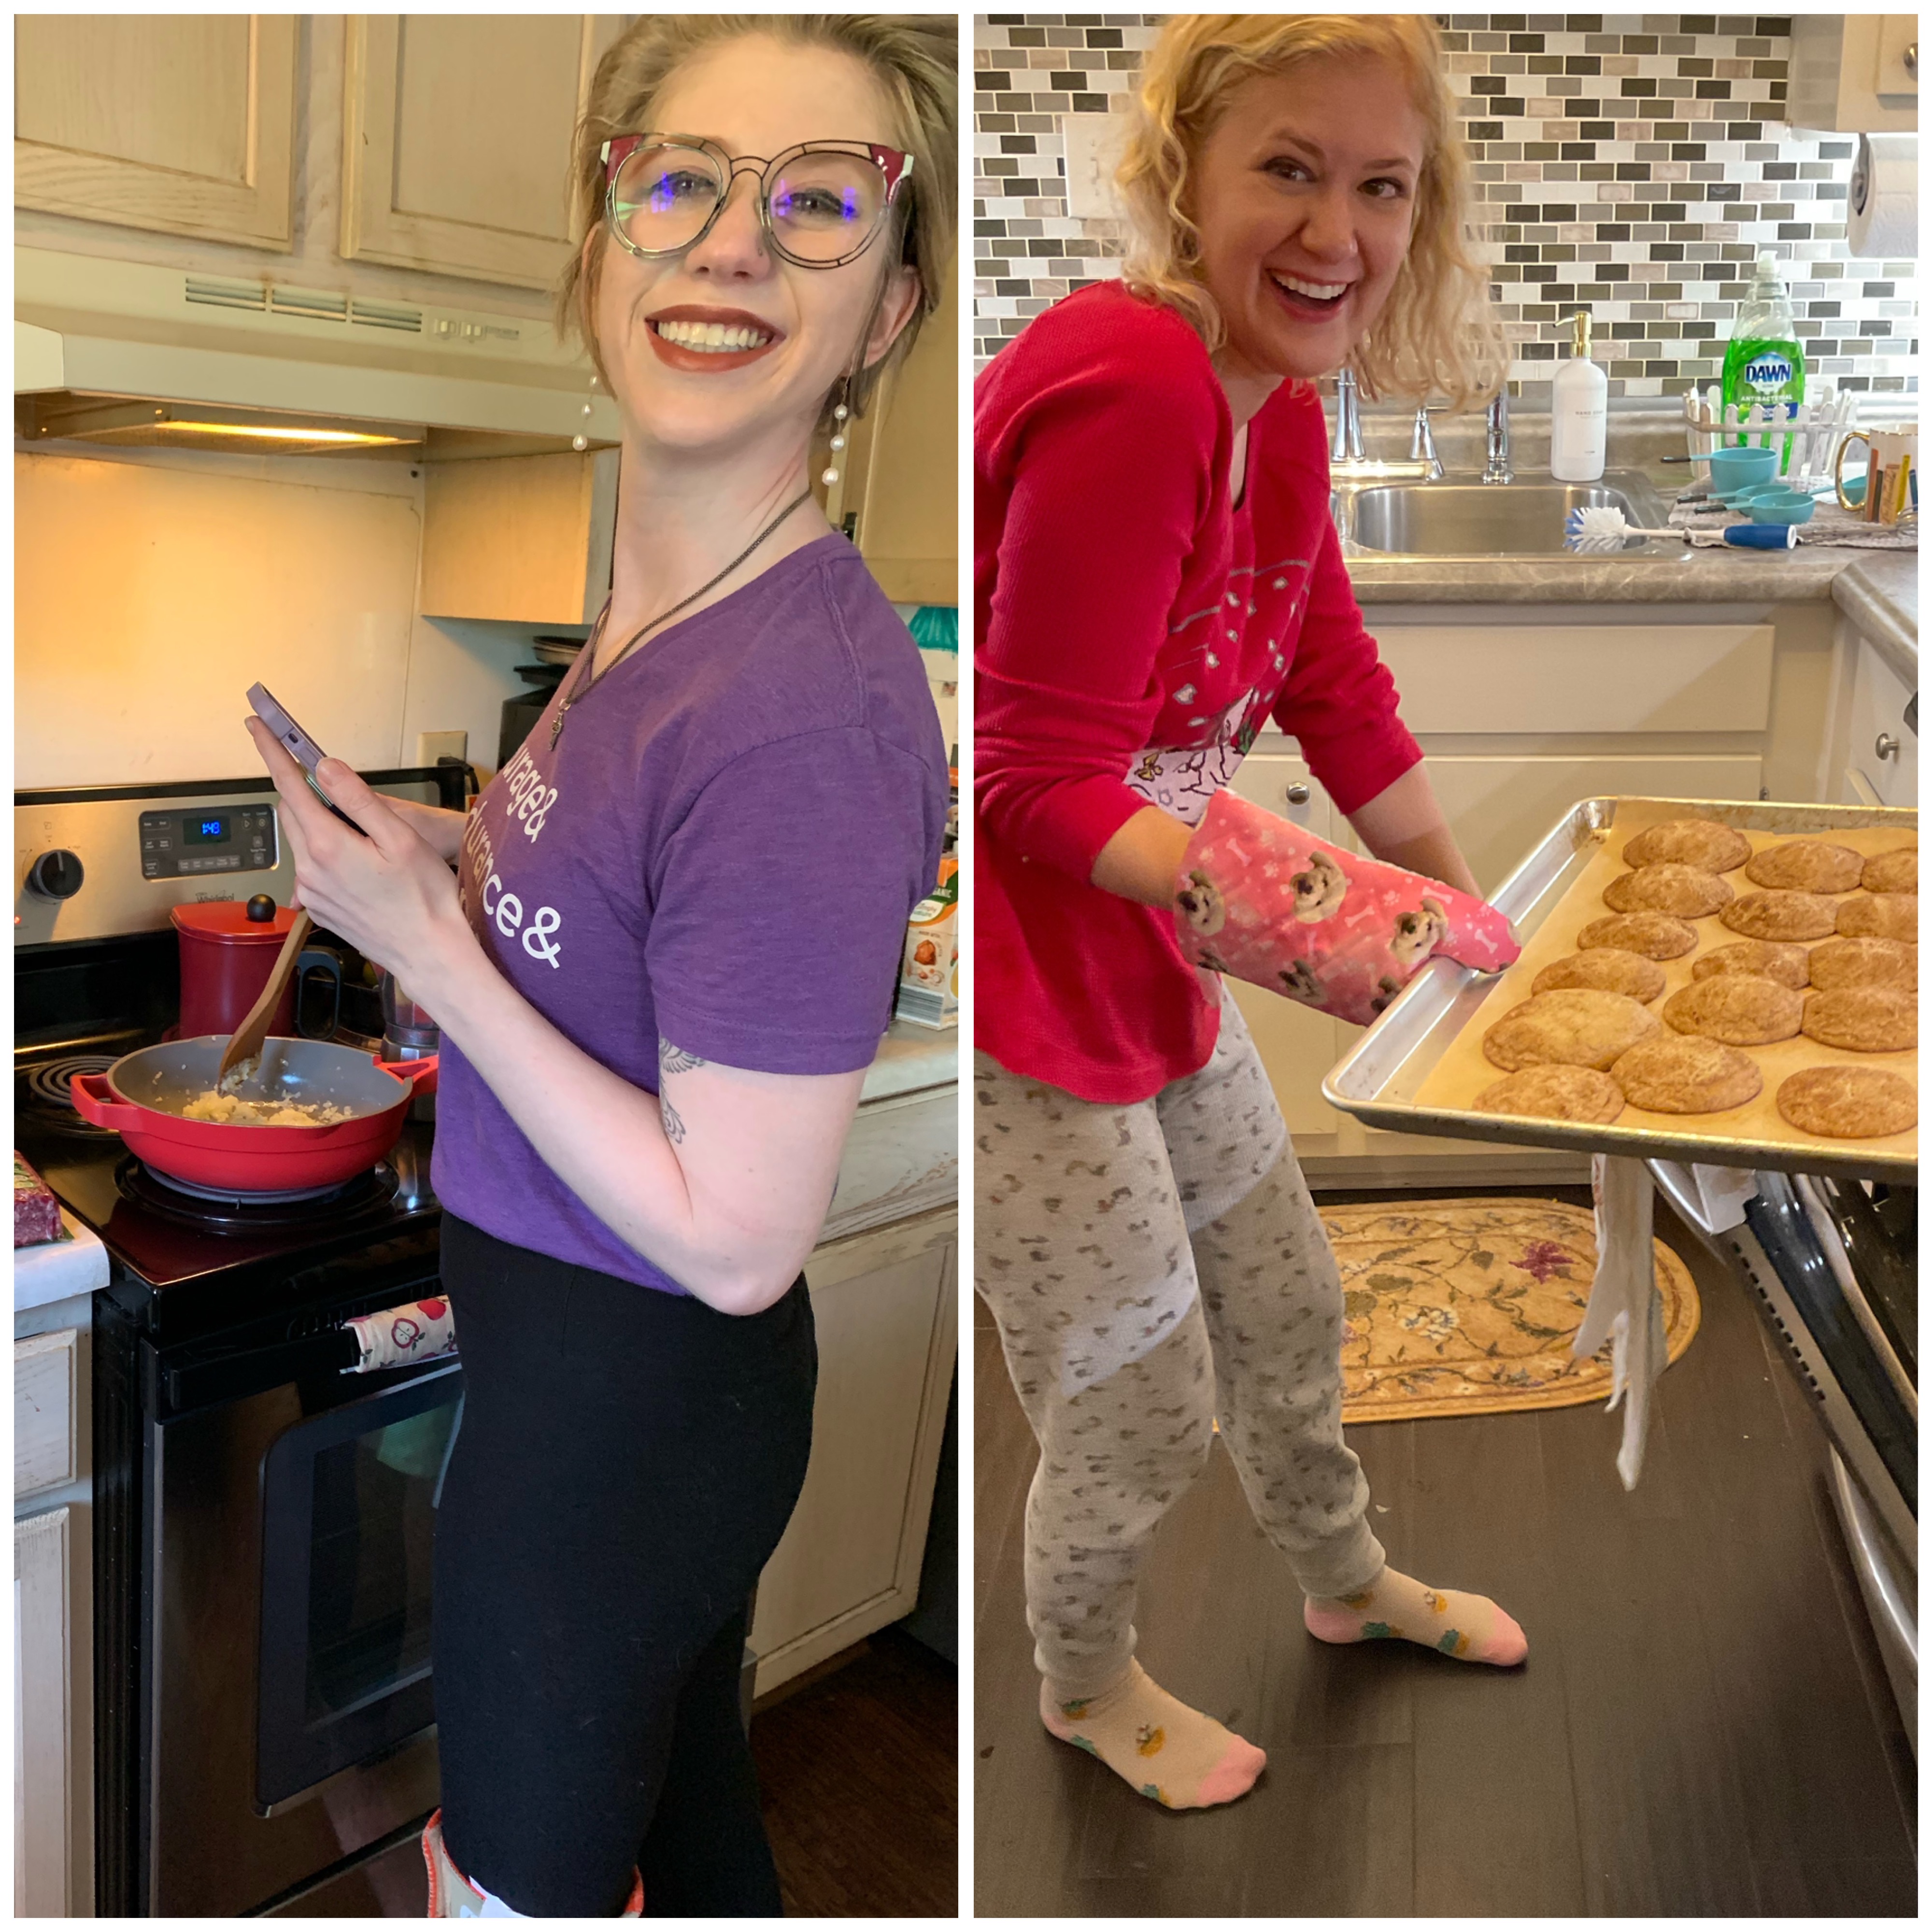 two photo collage of cass (left) and case (right) cooking. cass wears a purple tee and smiles over her shoulder while holding her phone with a red pan on the stove. case wears red and grey pajamas and grins while holding a tray of cookies with a pink over mitt